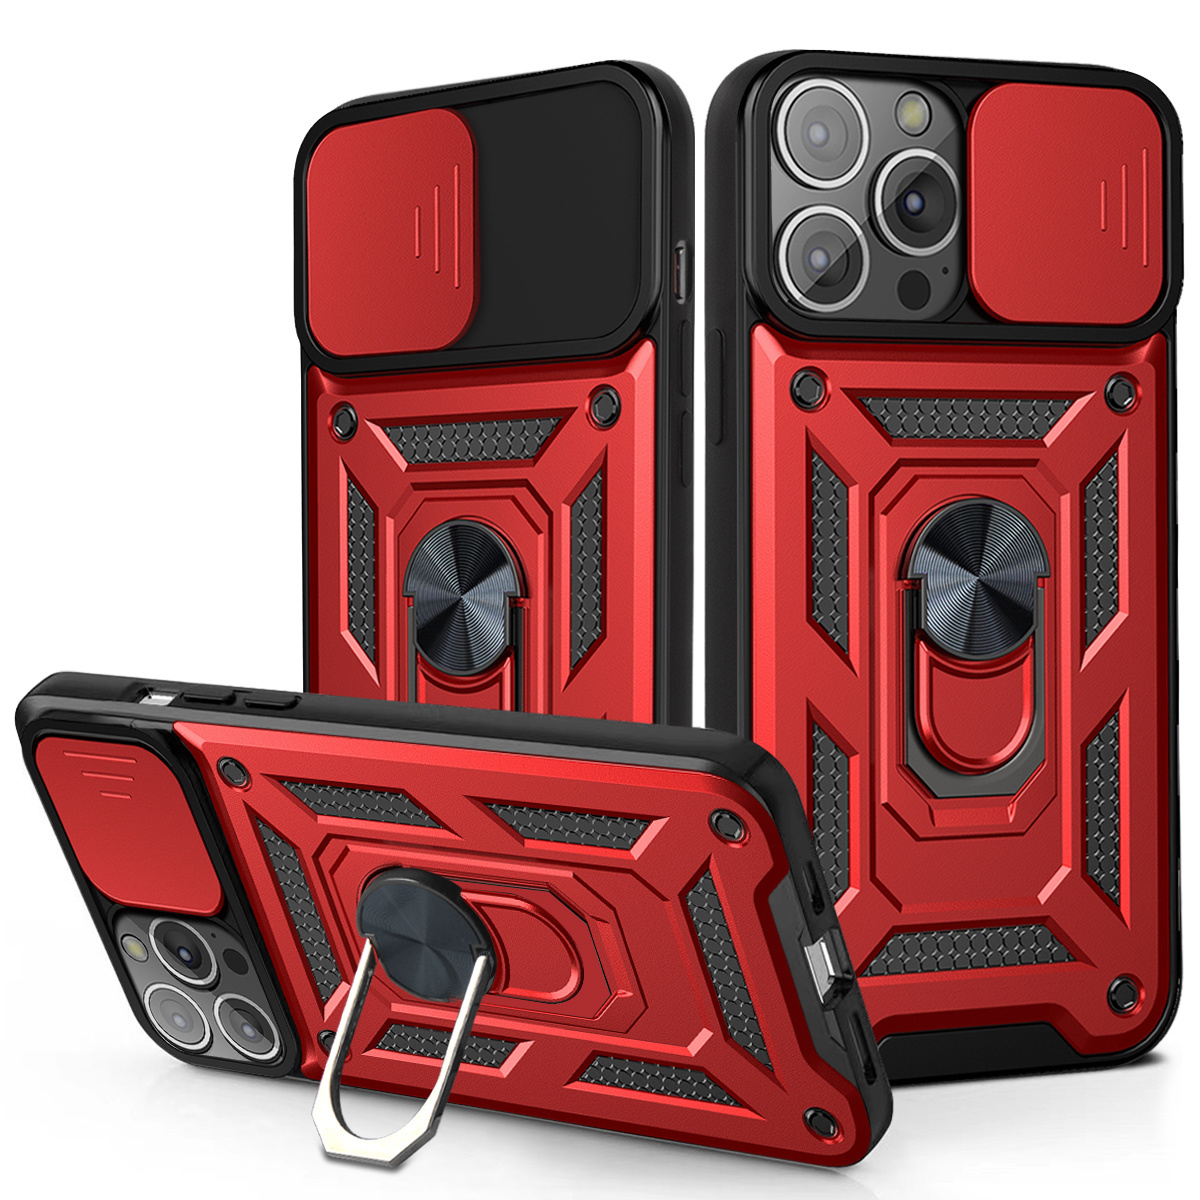 iPhone 13 Pro Max Rugged Armor Back Cover Hoesje met Camera Bescherming - Stevig - Heavy Duty - TPU - Apple iPhone 13 Pro Max - Rood